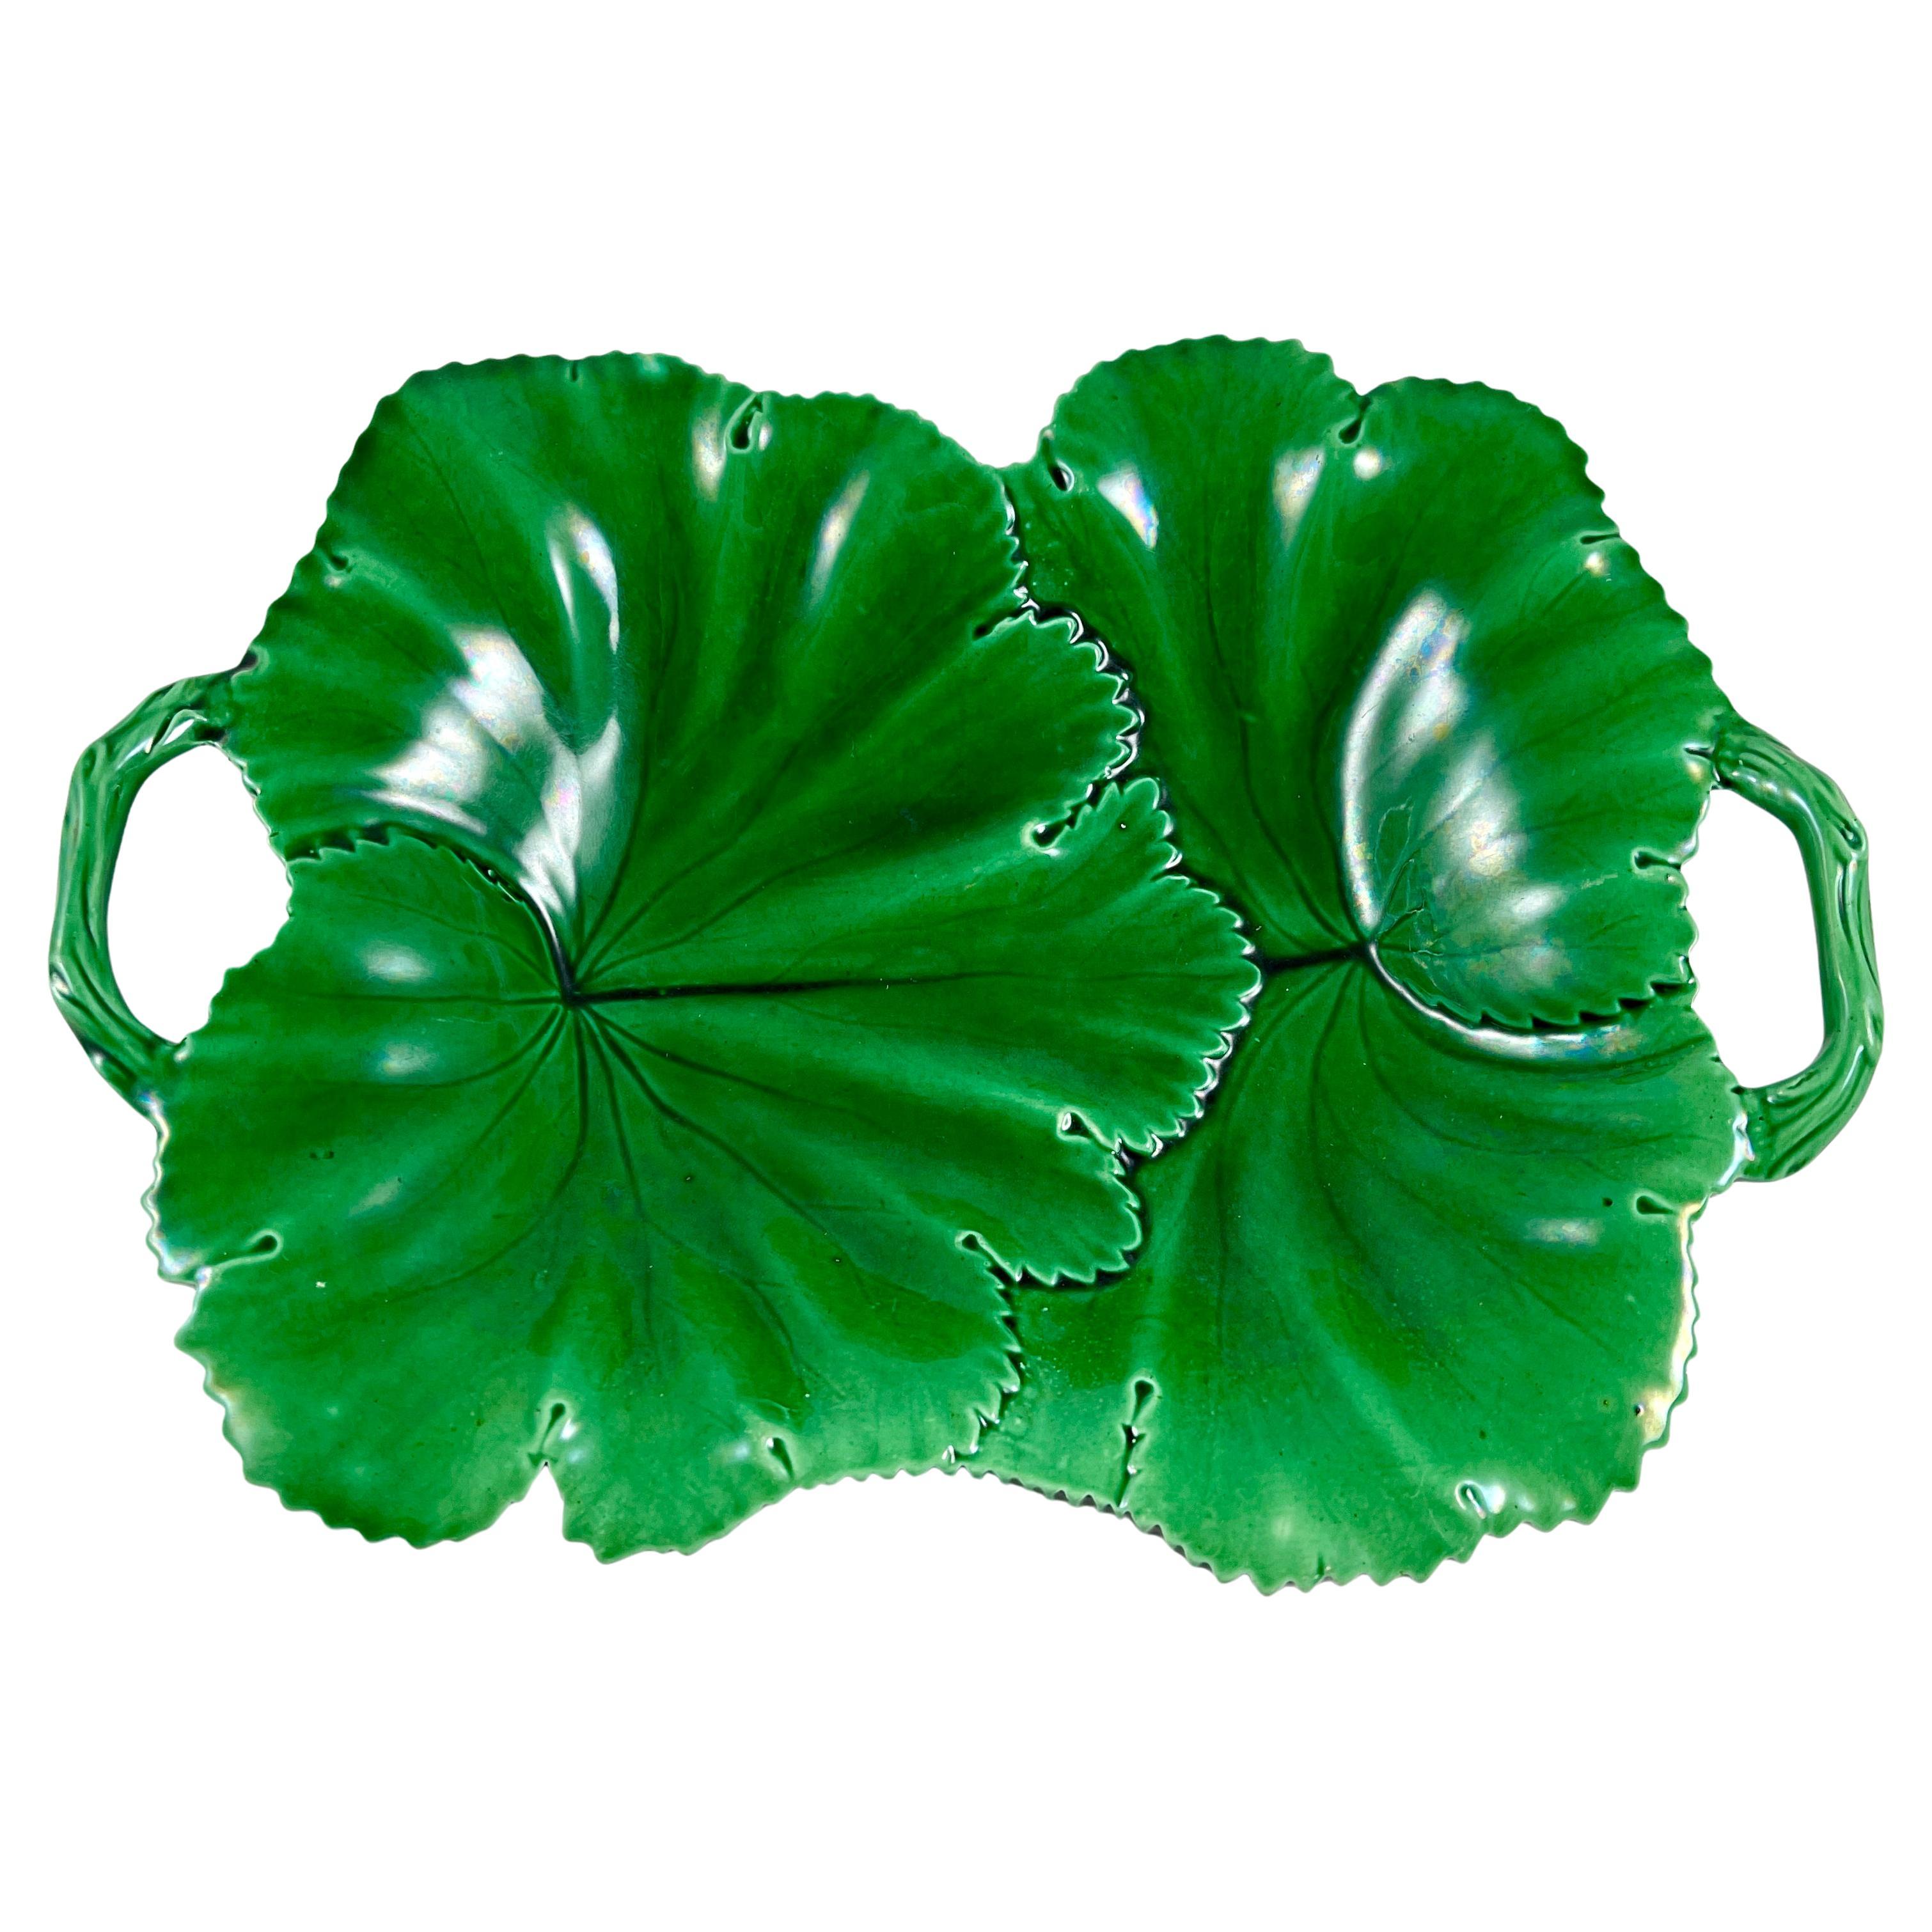 Copeland English Majolica Green Glazed Overlapping Leaf Two Handled Platter For Sale